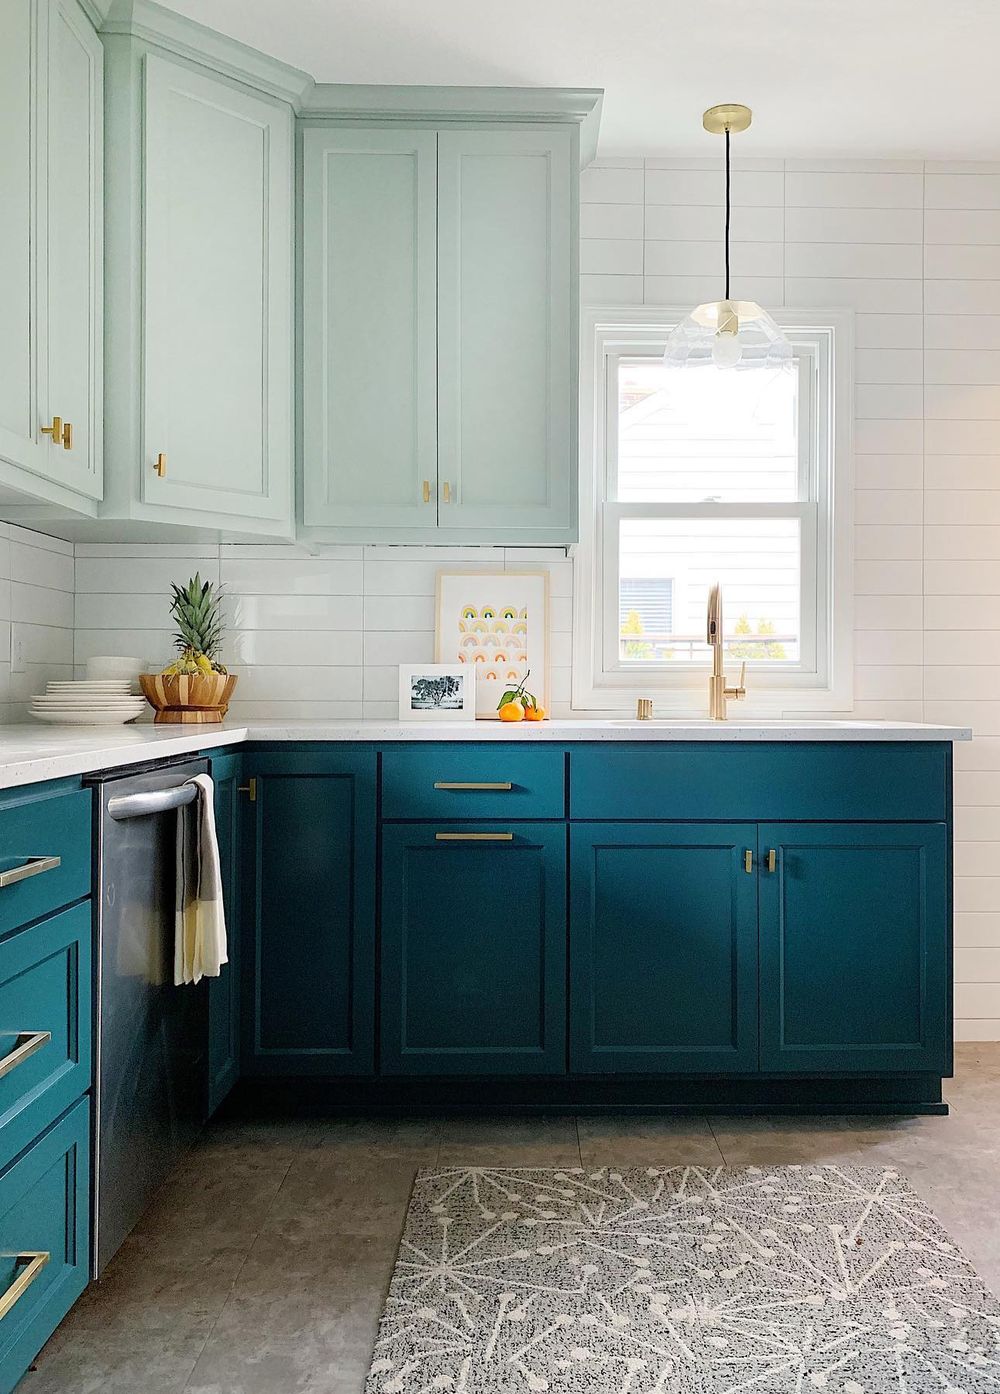 Popular kitchen cabinet colors - Two-toned kitchen cabinet ideas blue turquoise @foxhomesmn